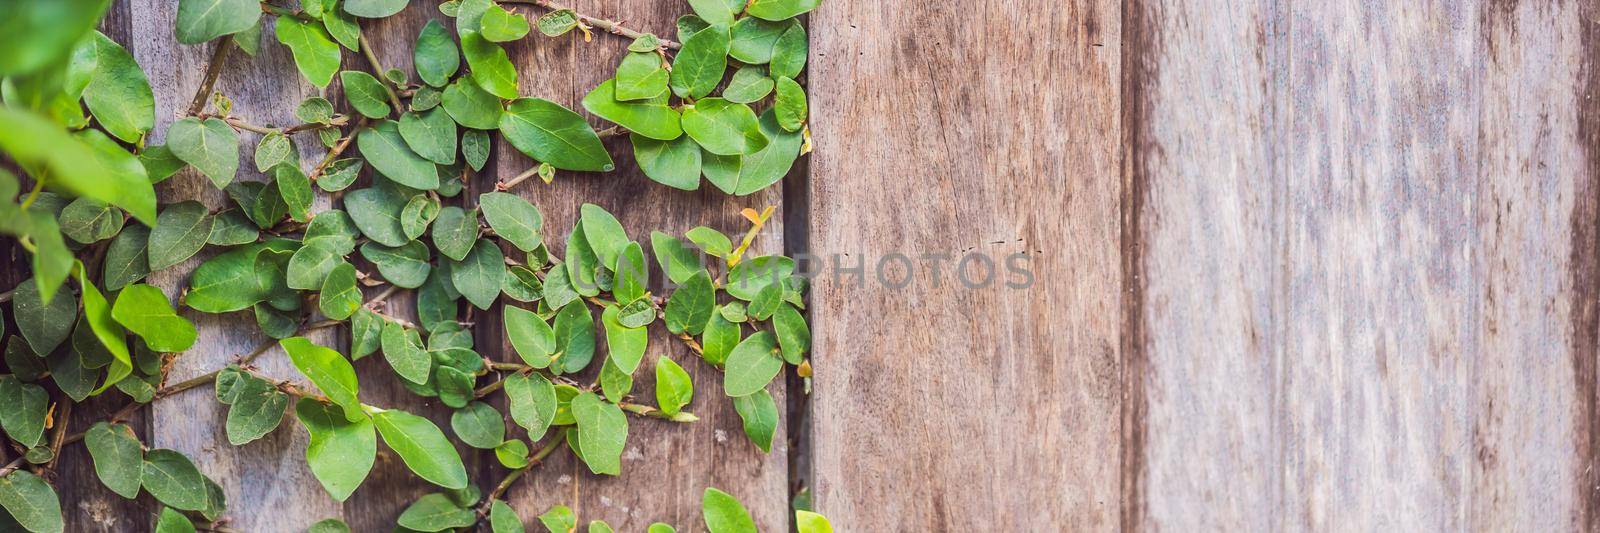 Texture of the old wooden fence and lash plants BANNER, LONG FORMAT by galitskaya